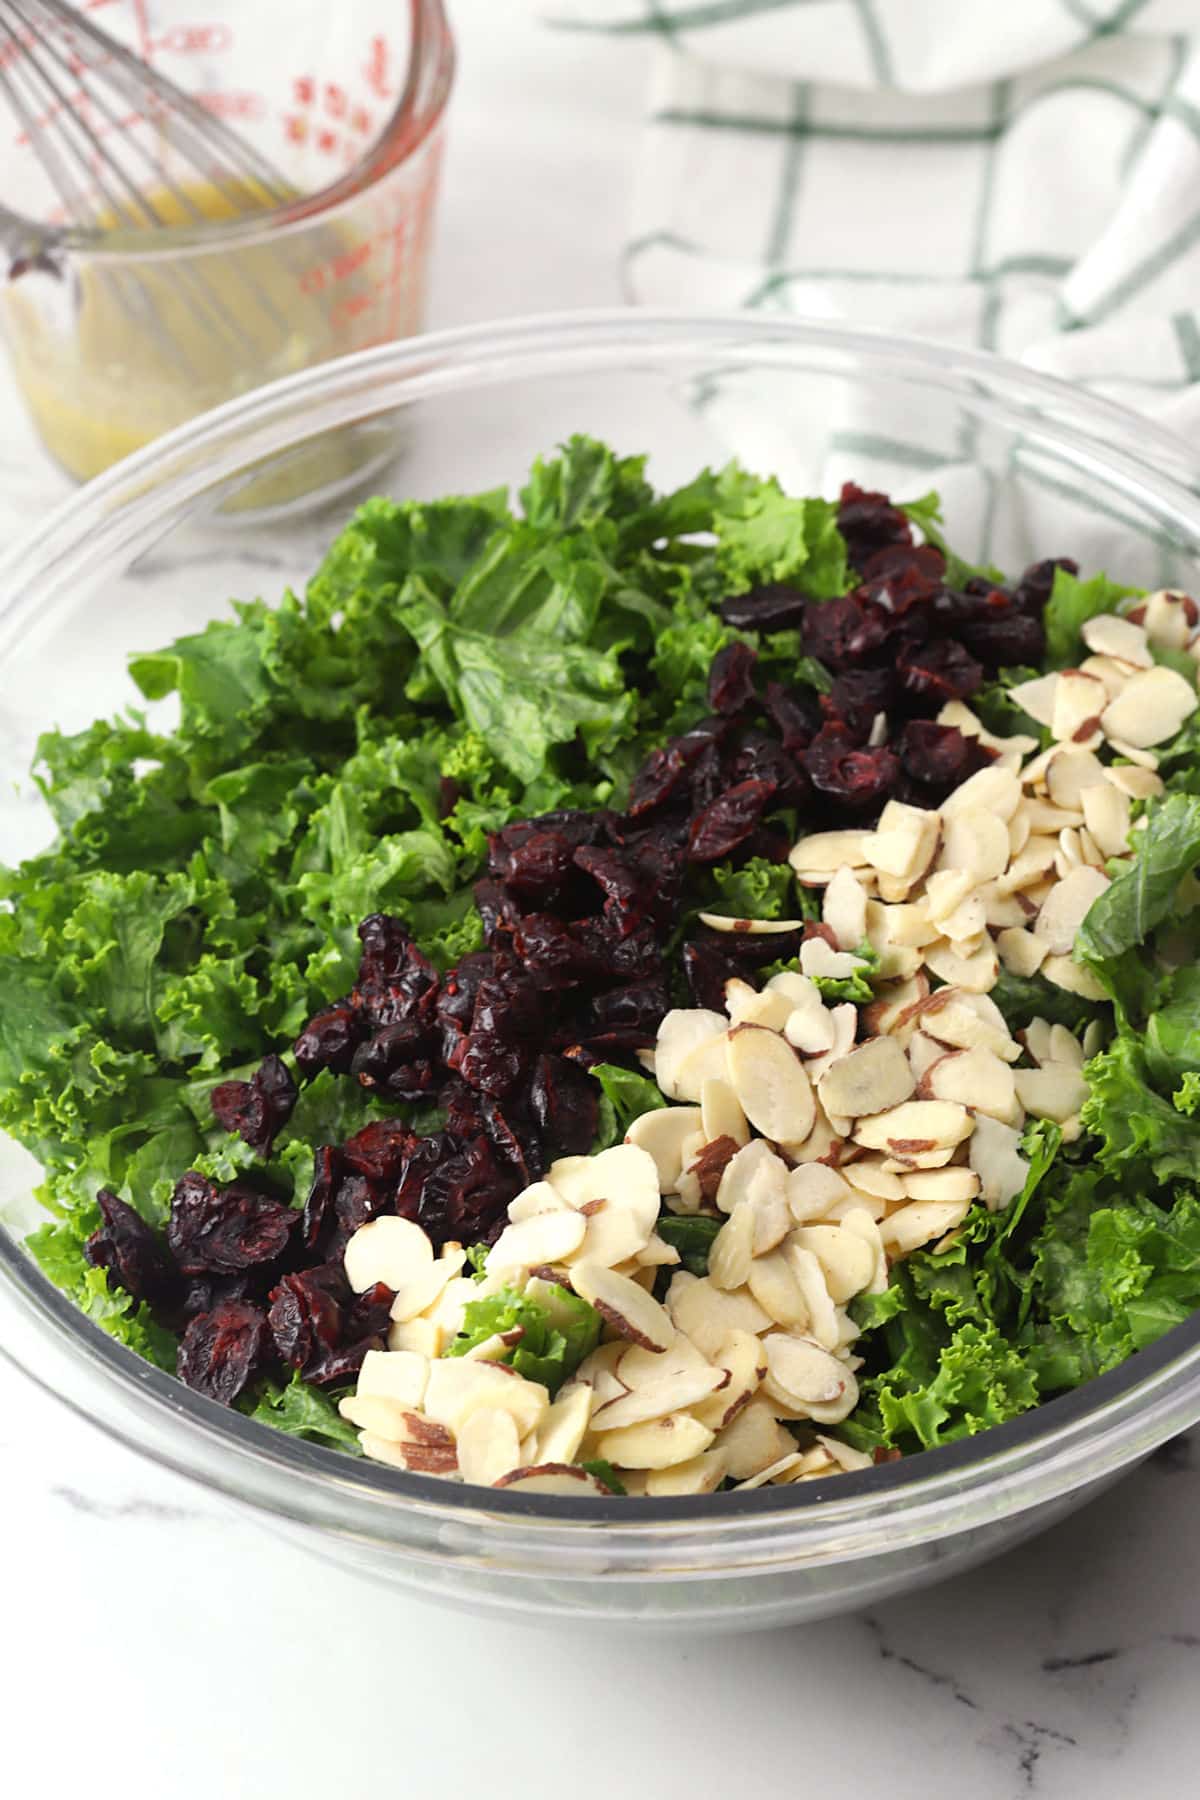 Kale cranberry salad ingredients in a large glass bowl.